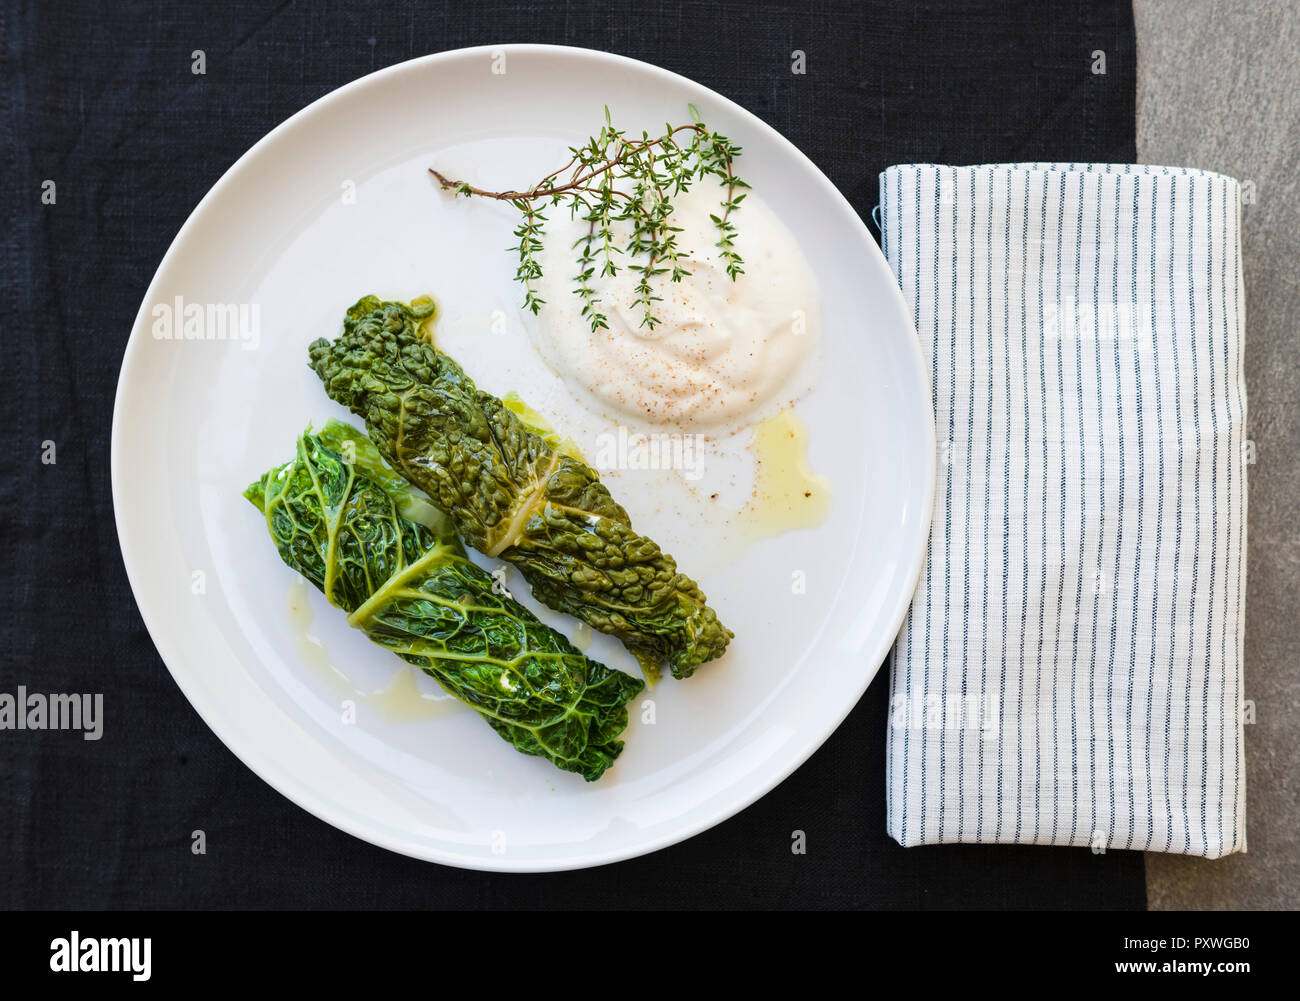 Two savoy cabbage rolls on plate Stock Photo